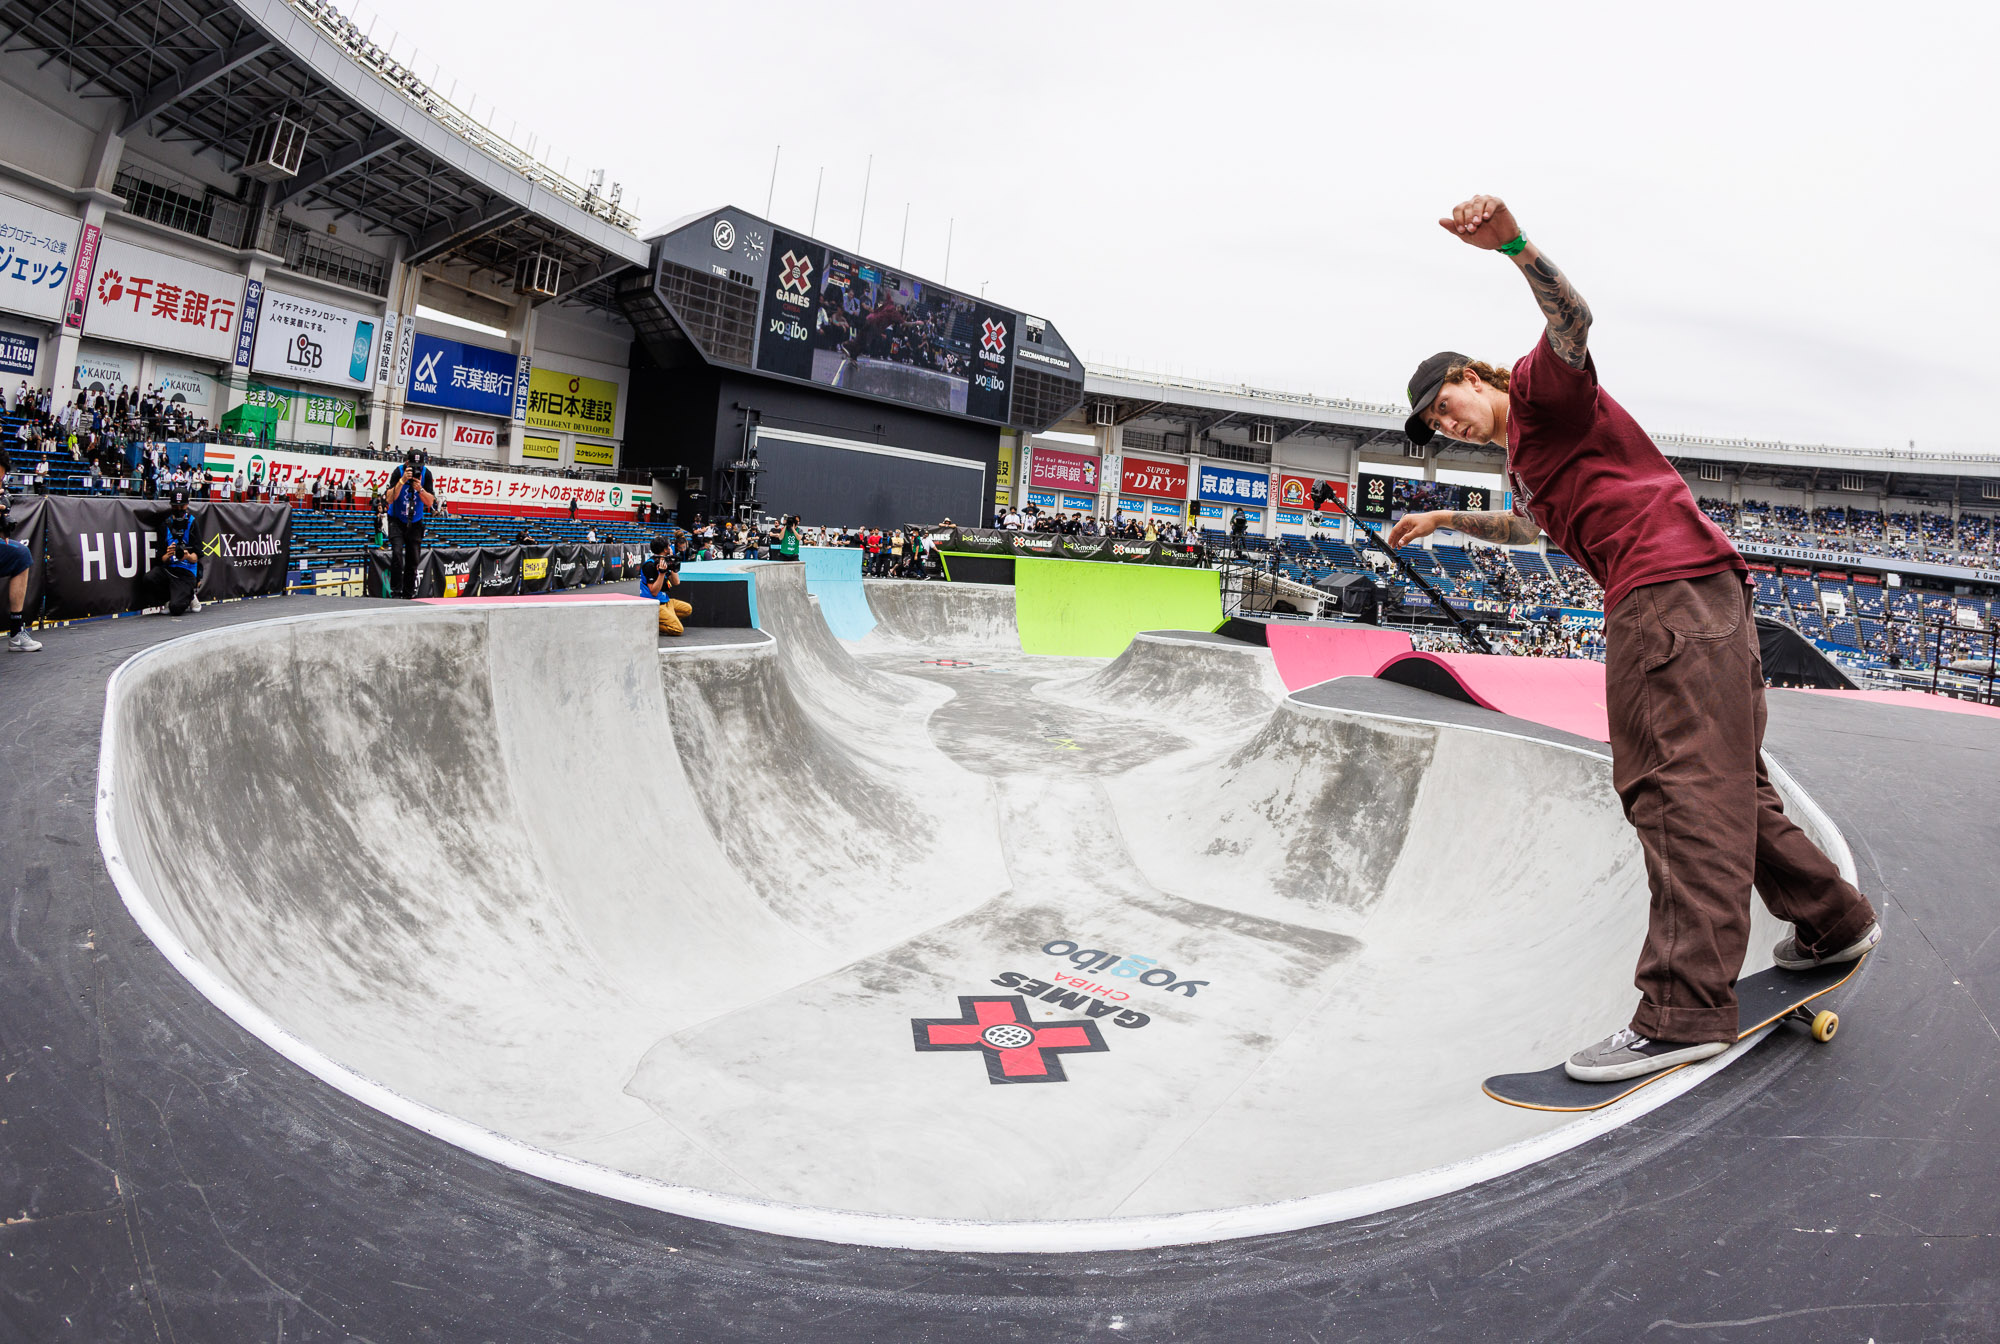 Monster Energy's Liam Pace Claims Bronze in Men's Skateboard Park at X Games Chiba 2022